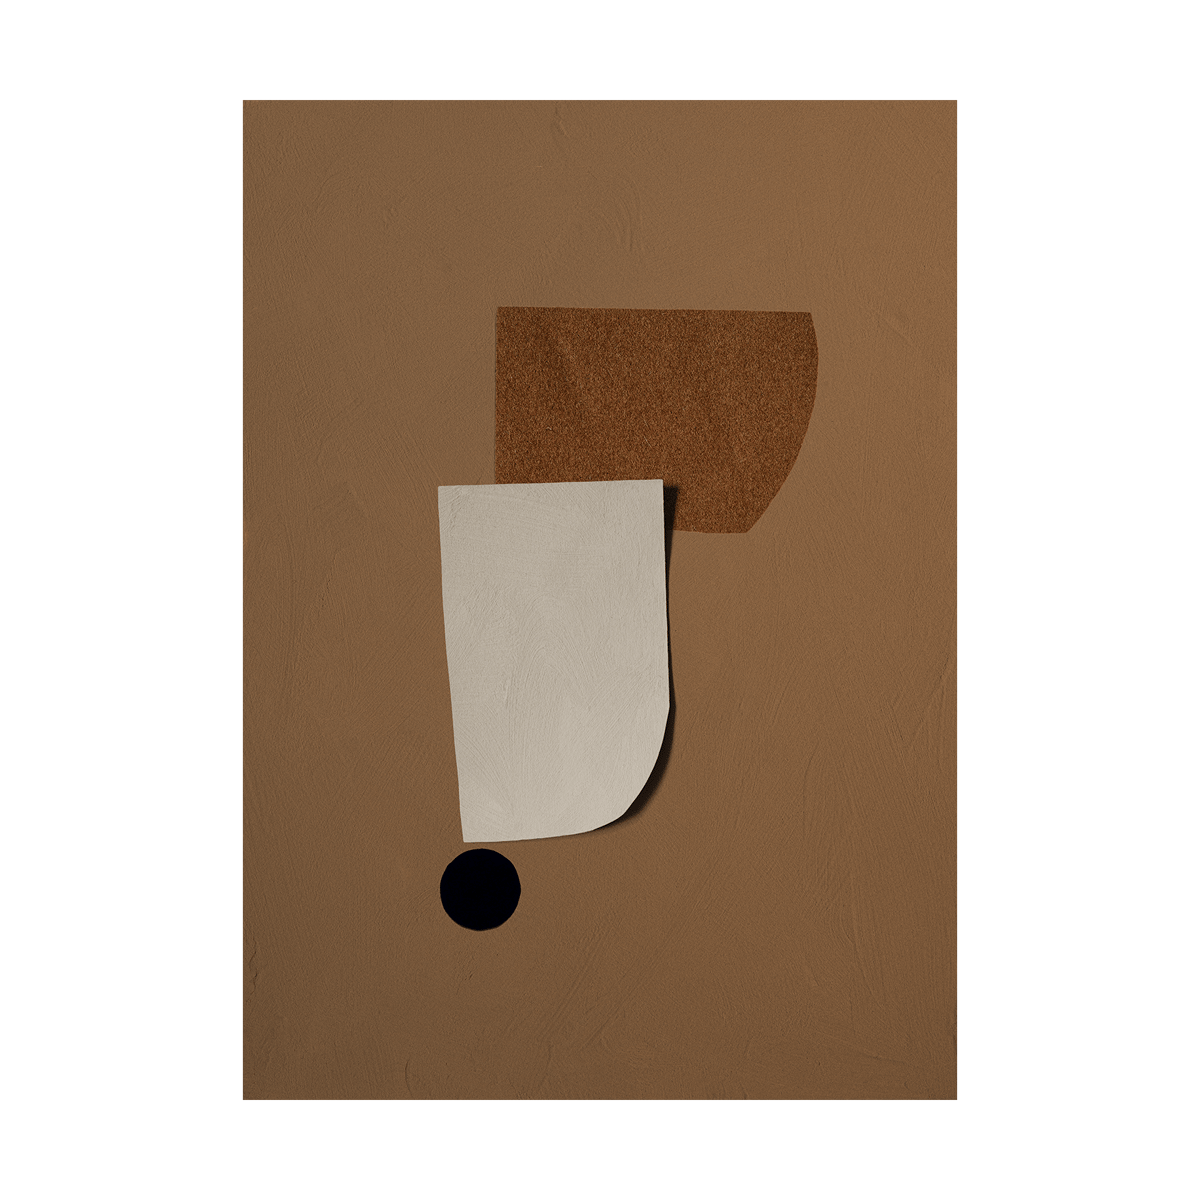 Paper Collective Tipping Point 02 plakat 50×70 cm